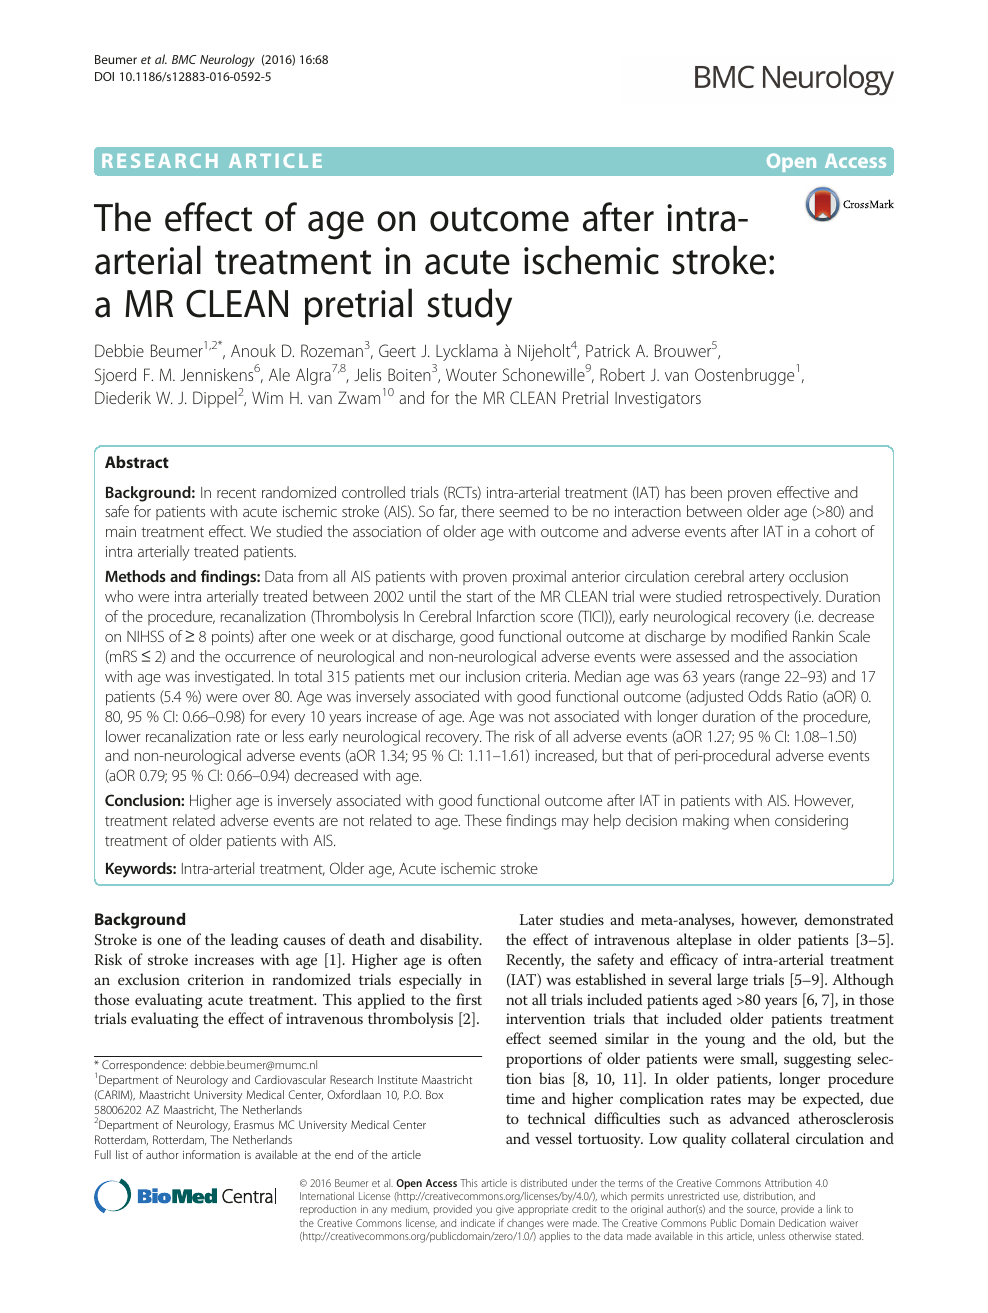 The Effect Of Age On Outcome After Intra Arterial Treatment In Acute Ischemic Stroke A Mr Clean Pretrial Study Topic Of Research Paper In Clinical Medicine Download Scholarly Article Pdf And Read